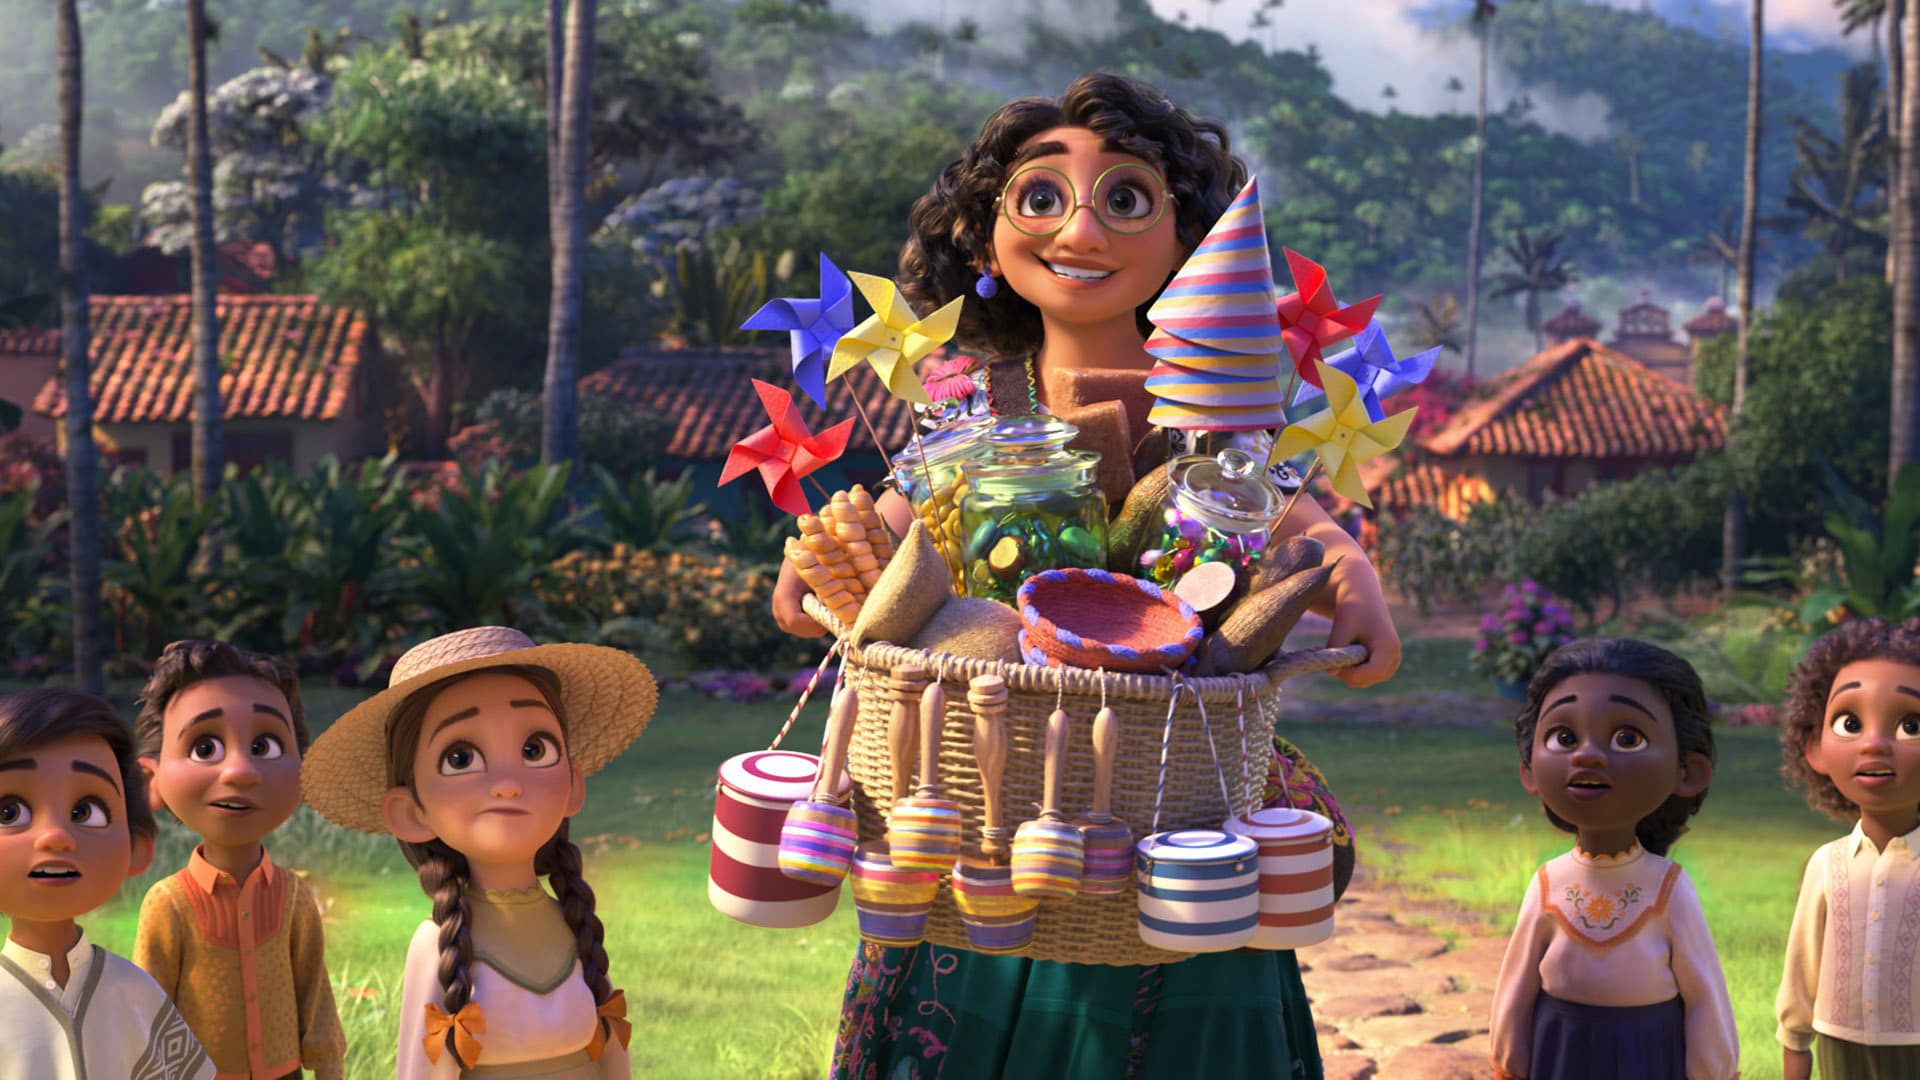 review movie Disney Encanto release date and in which cinemas in Spain it can be seen